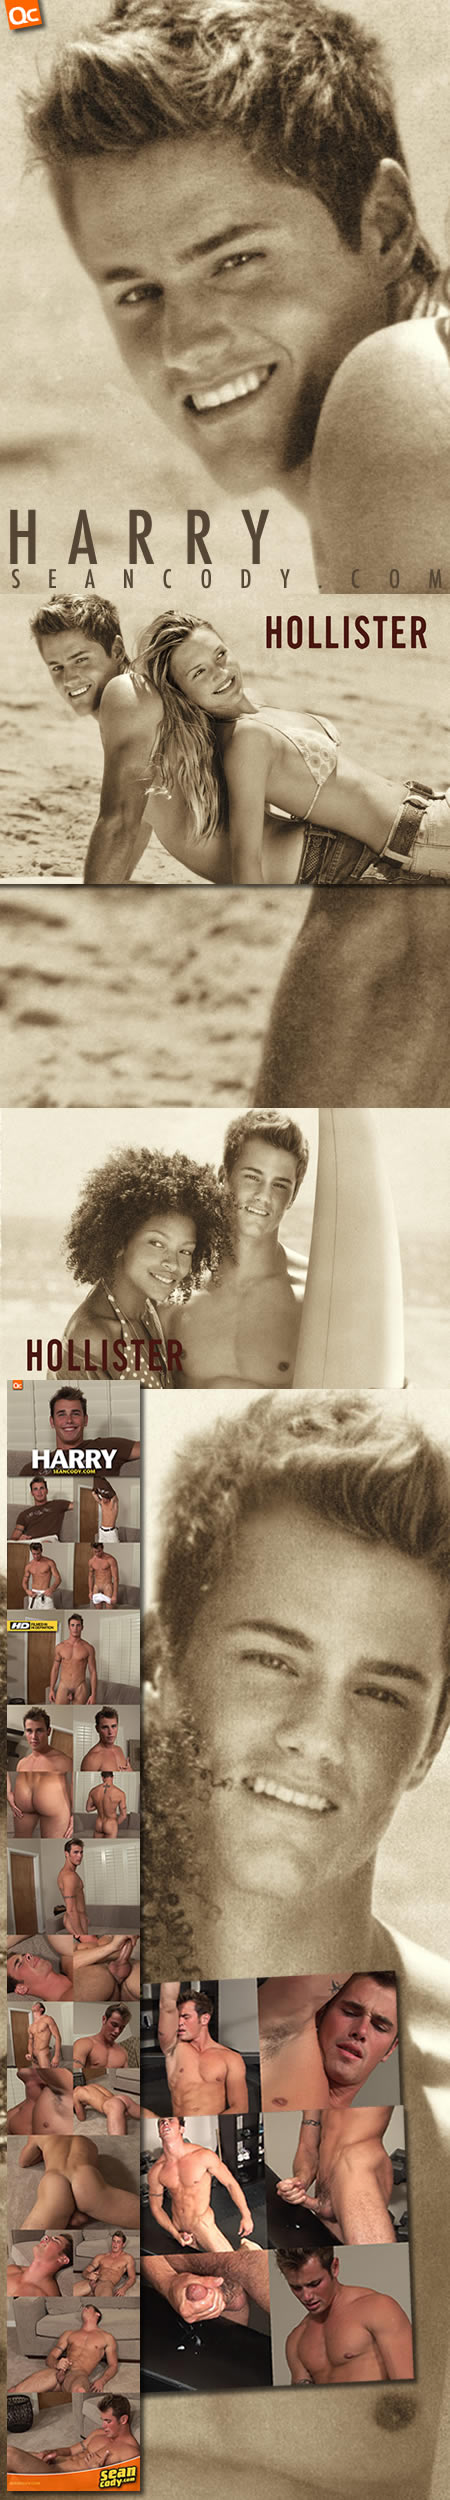 Harry from SeanCody.com is a Hollister model!